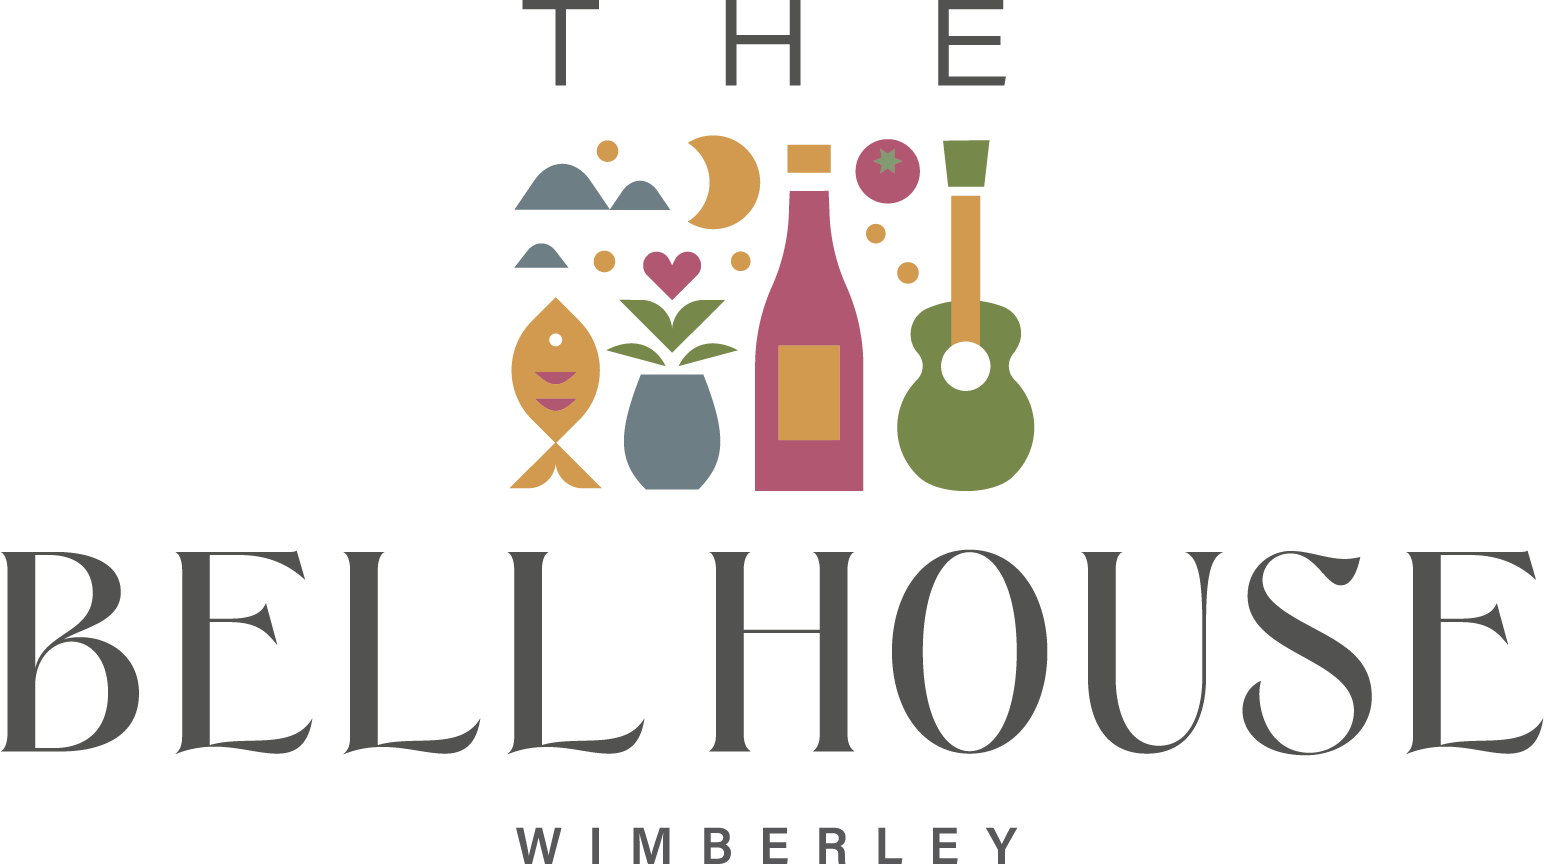 THE BELL HOUSE WIMBERLEY